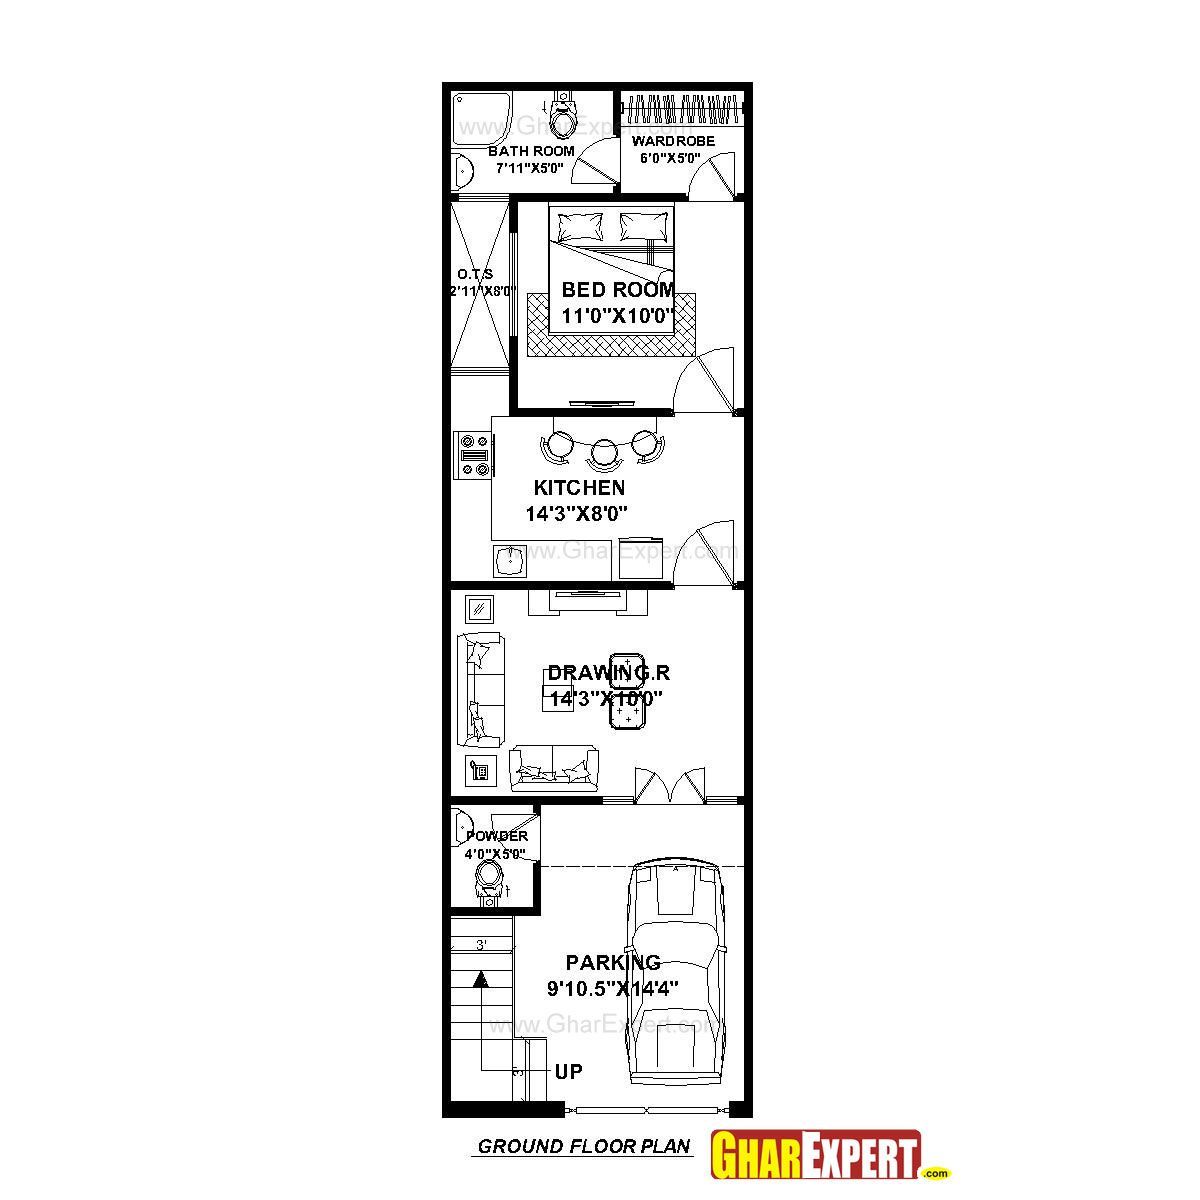 Image result for 15x60 sq feet row house floor plan with